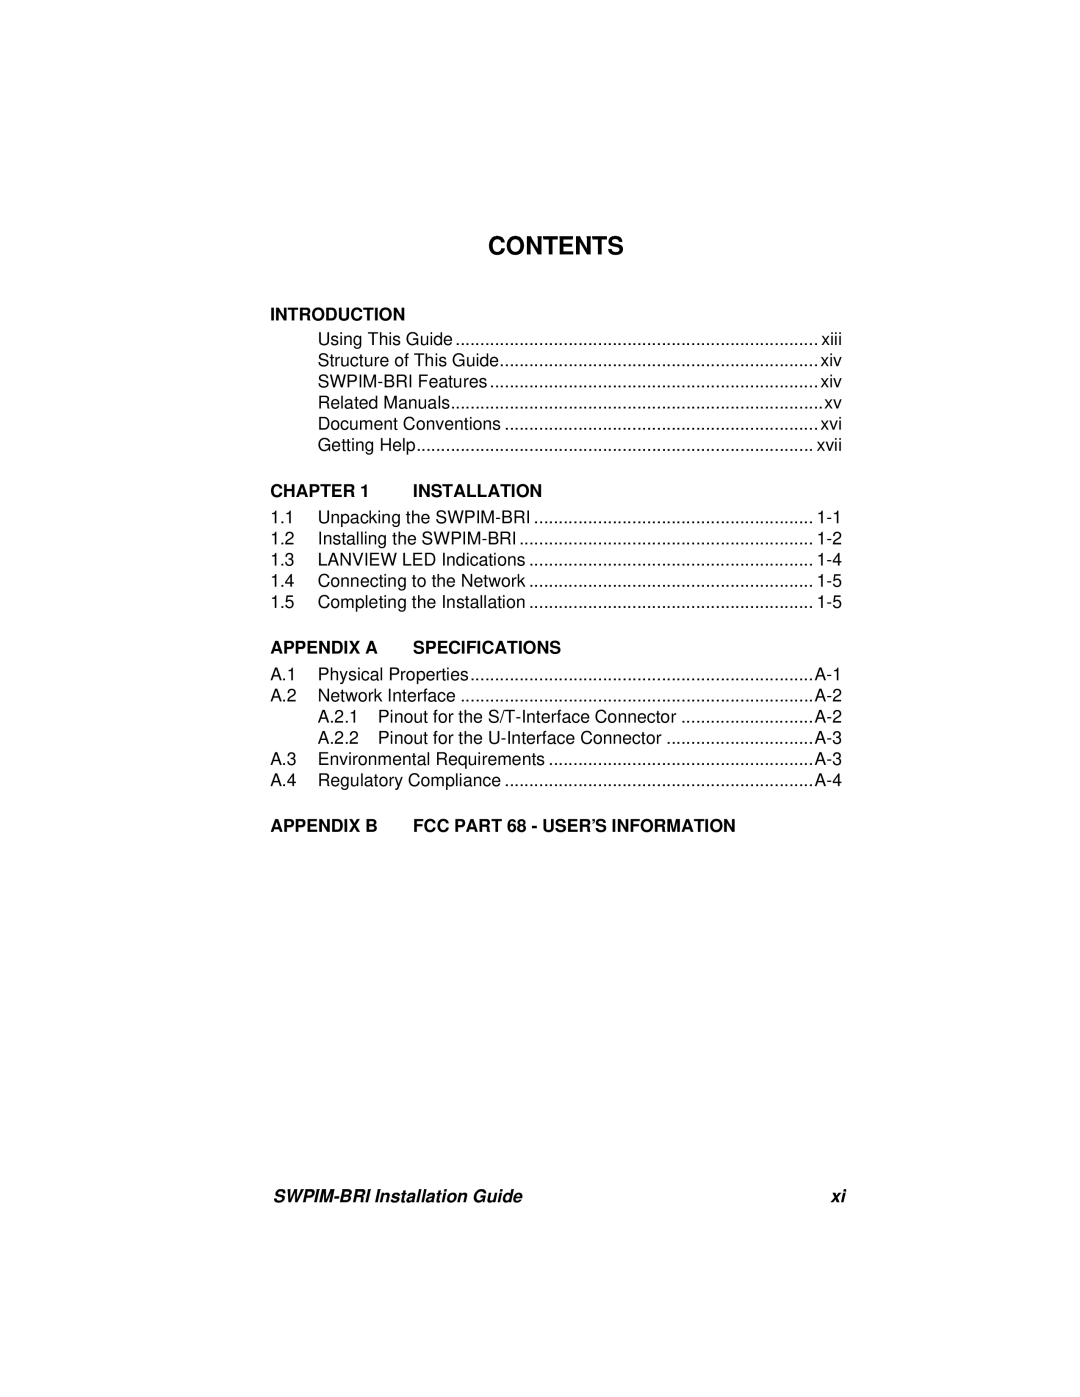 Cabletron Systems SWPIM-BRI manual Contents, Introduction, Chapter, Installation, Appendix A, Specifications, Appendix B 